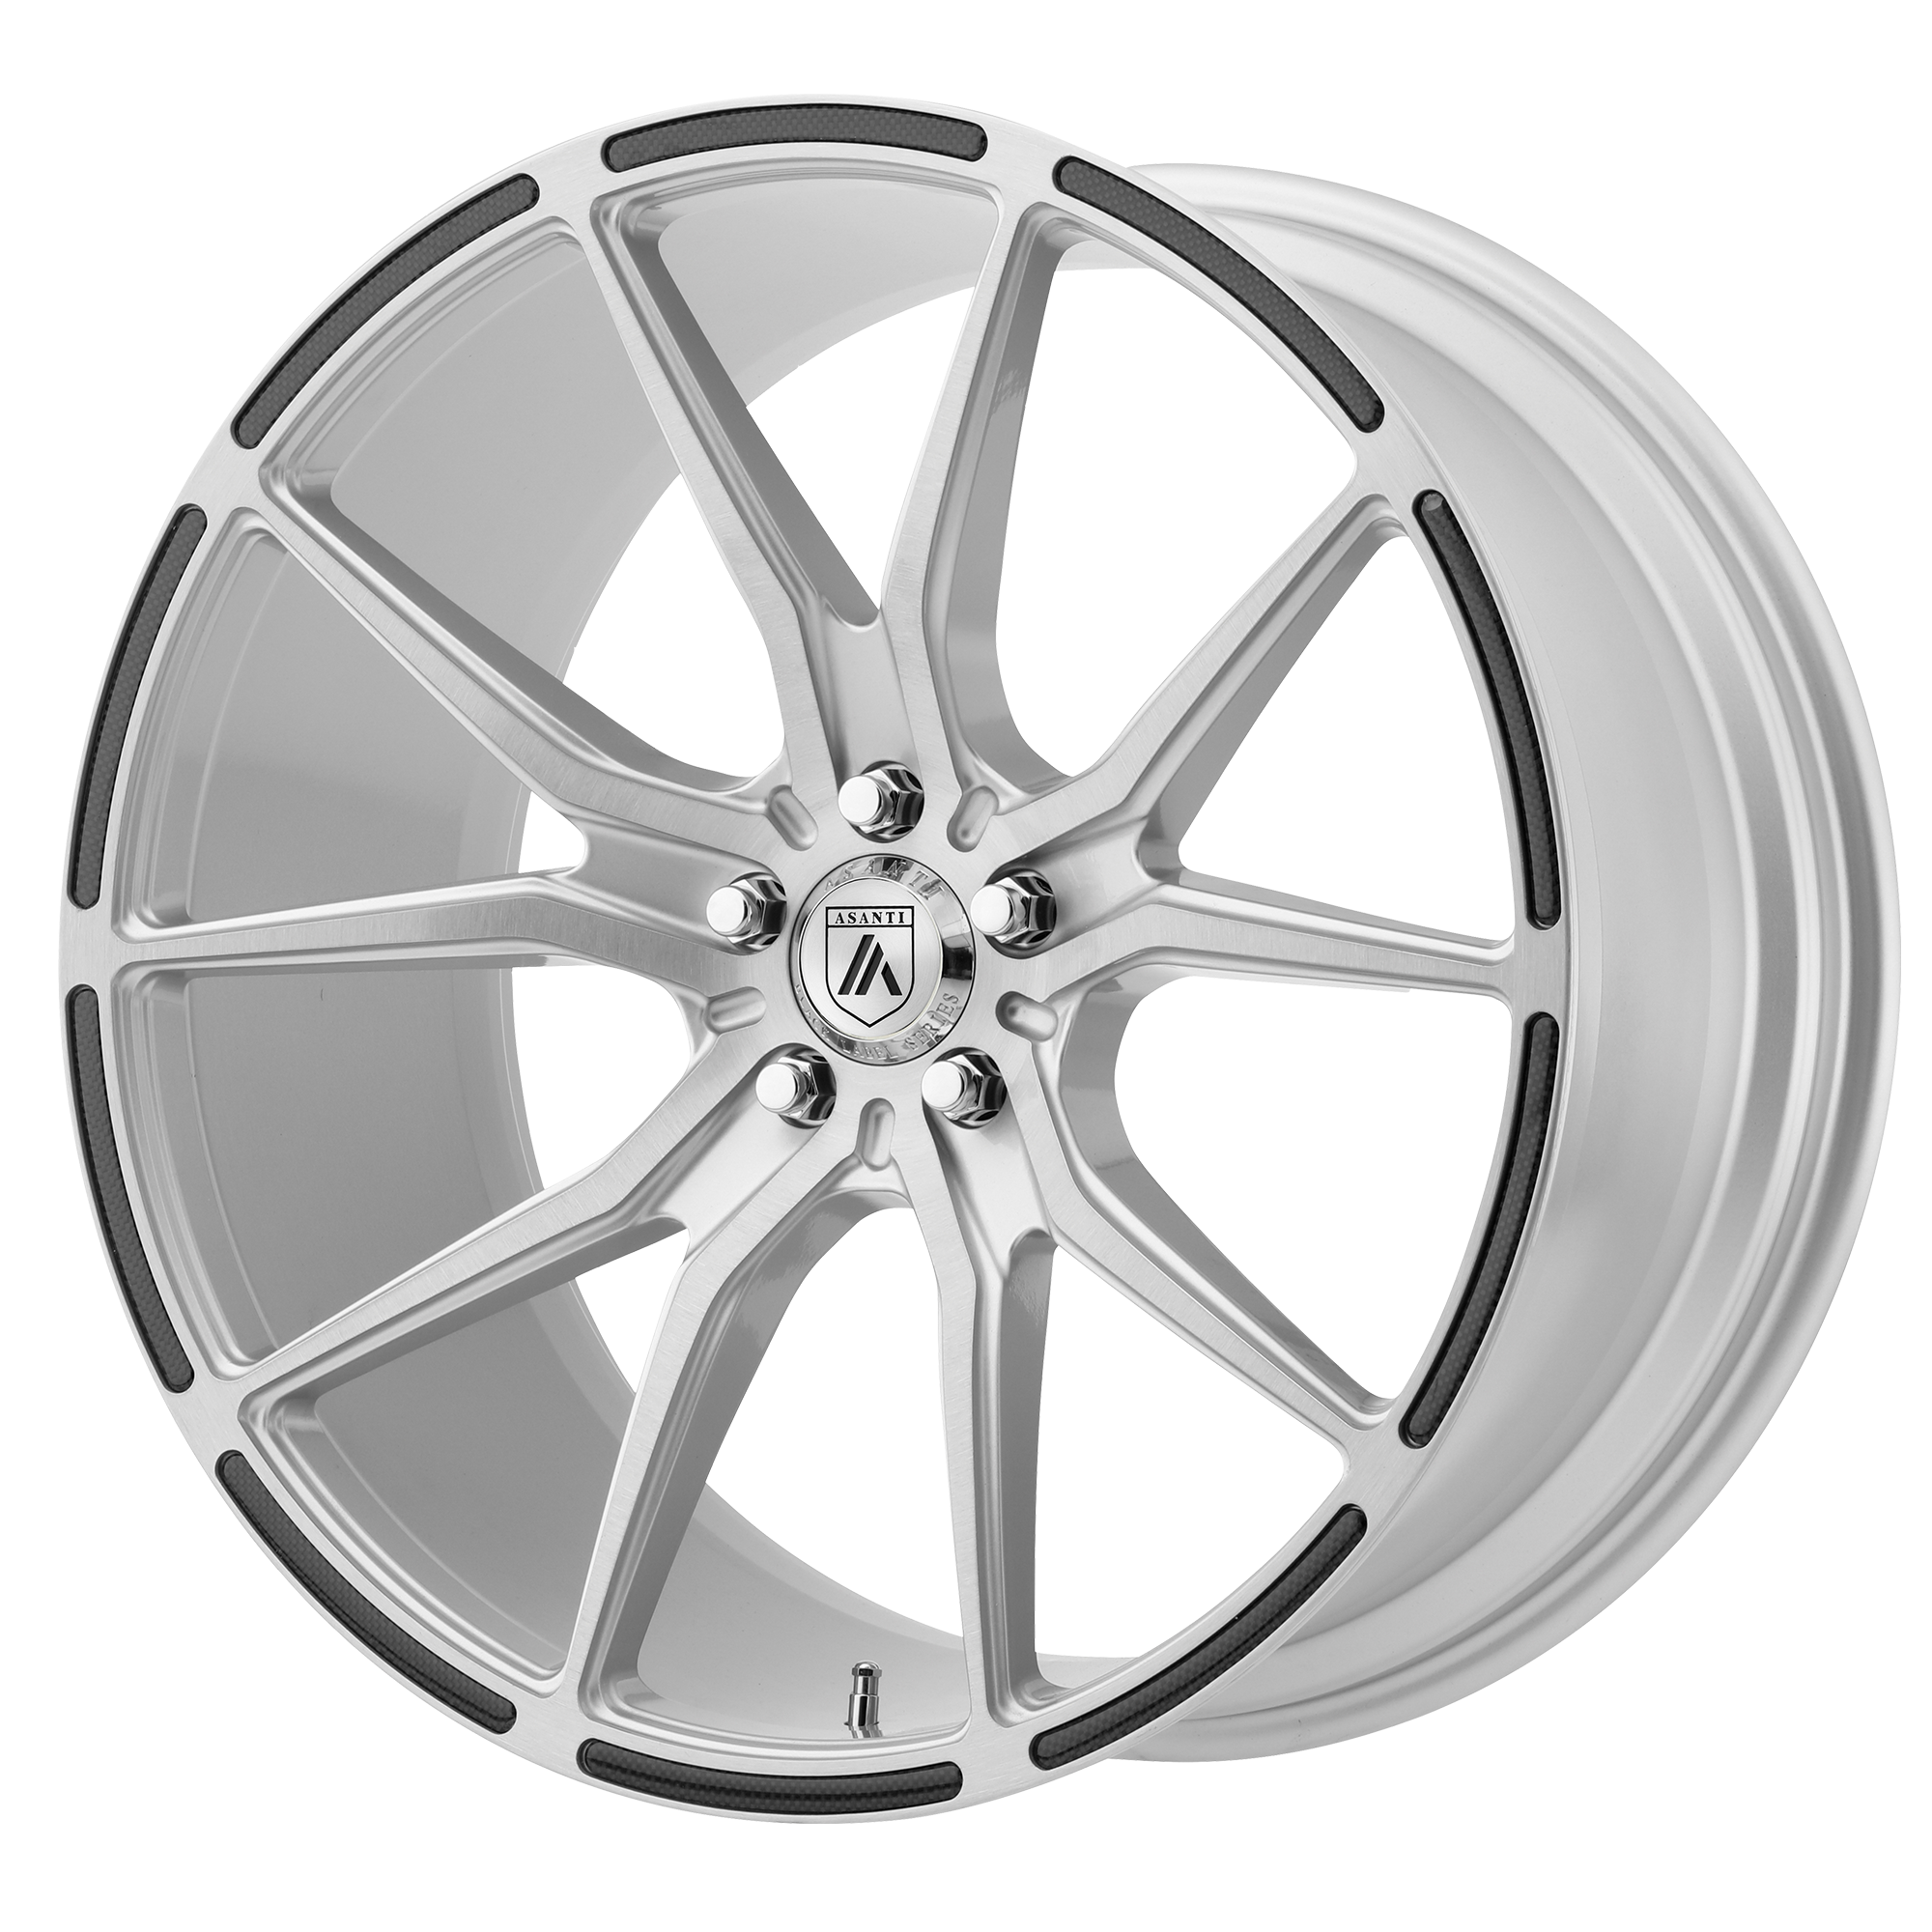 VEGA 20x10.5 5x115.00 BRUSHED SILVER W/ CARBON FIBER INSERTS (20 mm) - Tires and Engine Performance